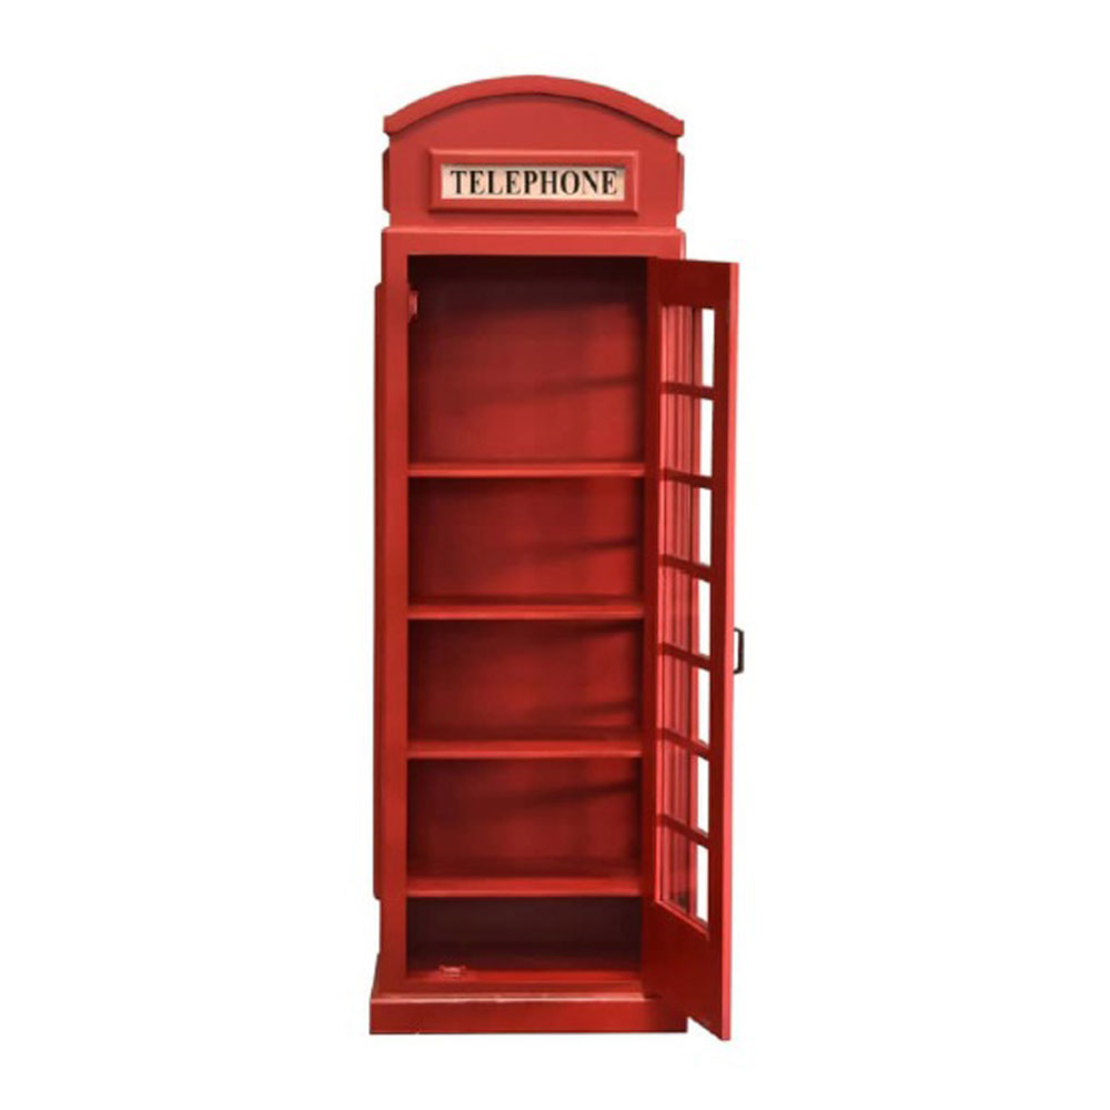 LONDON CALLING BOOKCASE TALL METAL RED 64x40xH180cm IN